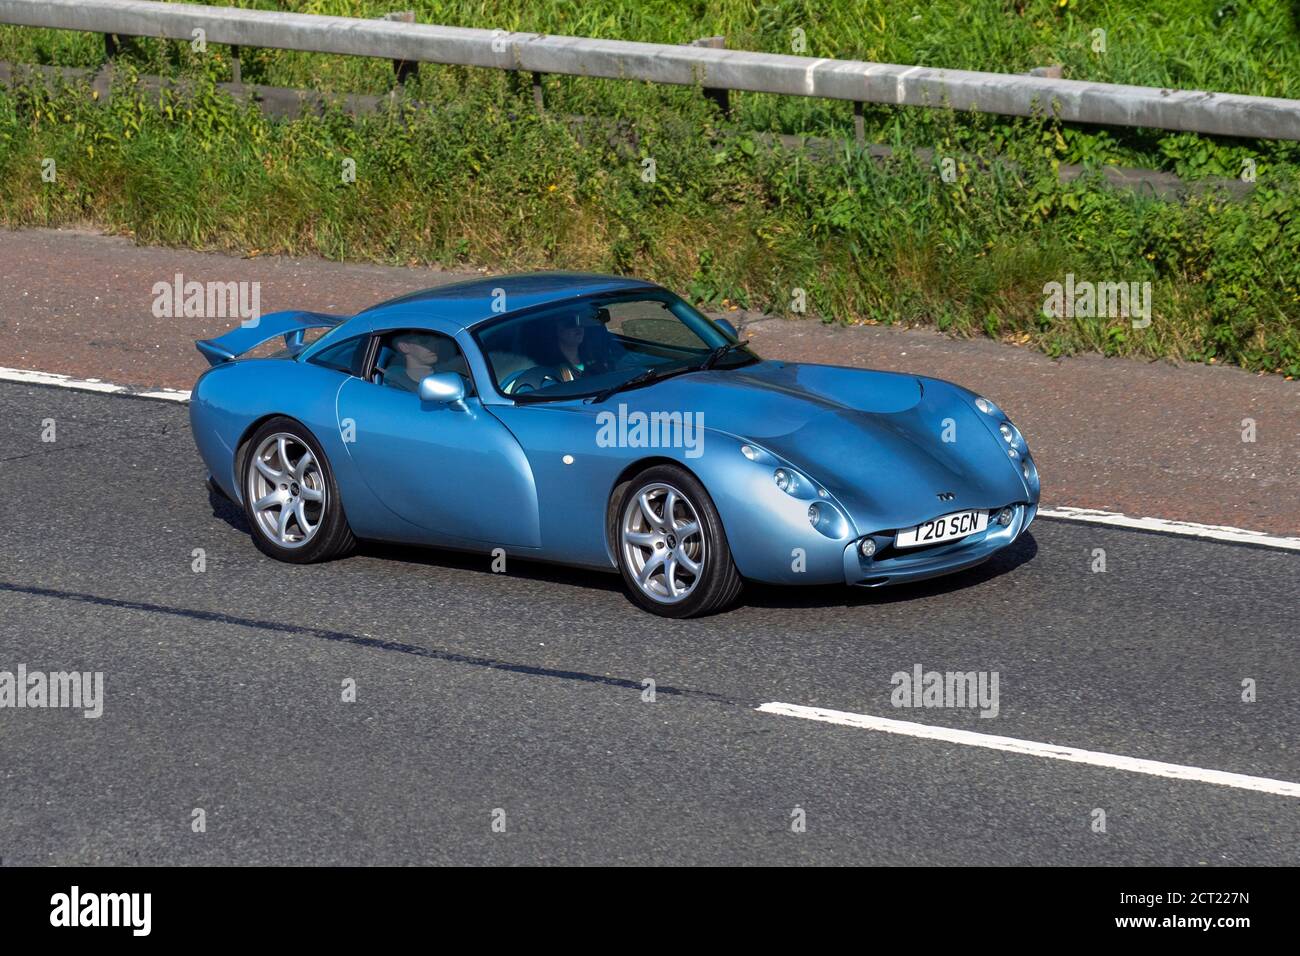 2002 Classic Le Mans Blue Tvr Tuscan; Vehicular traffic moving vehicles, cars driving vehicle on UK roads, motors, motoring on the M6 motorway highway network. Stock Photo